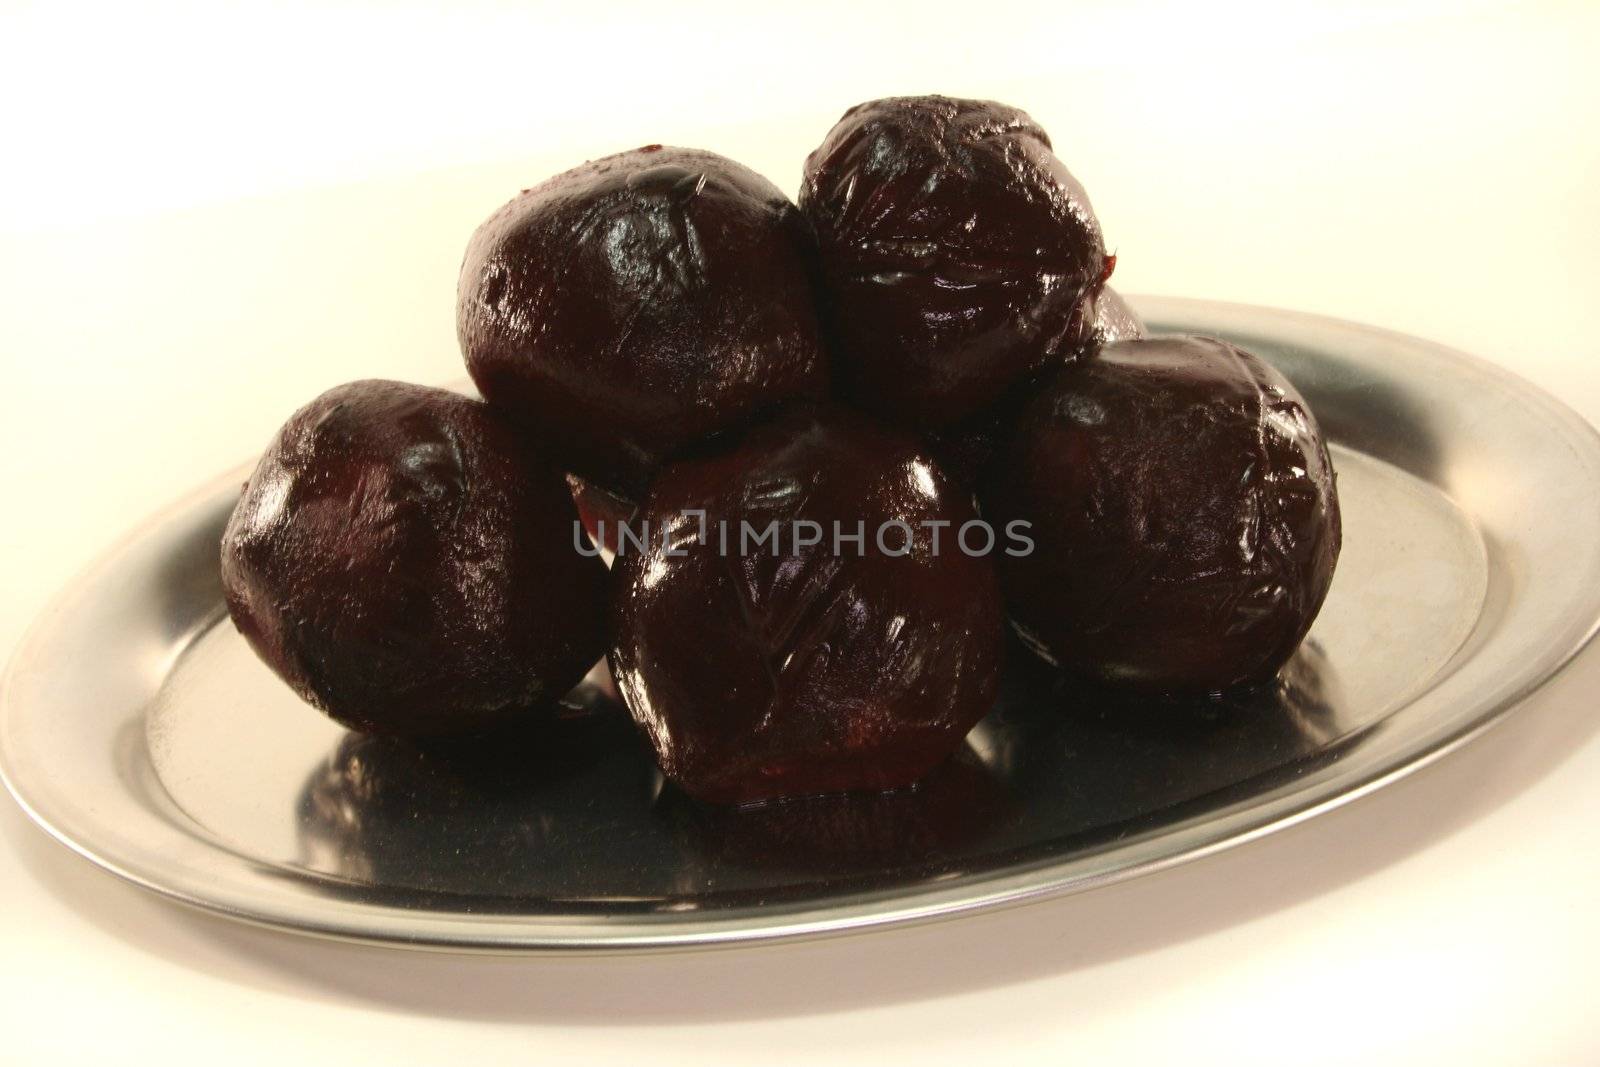 beetroot balls on a silver platter before a white background